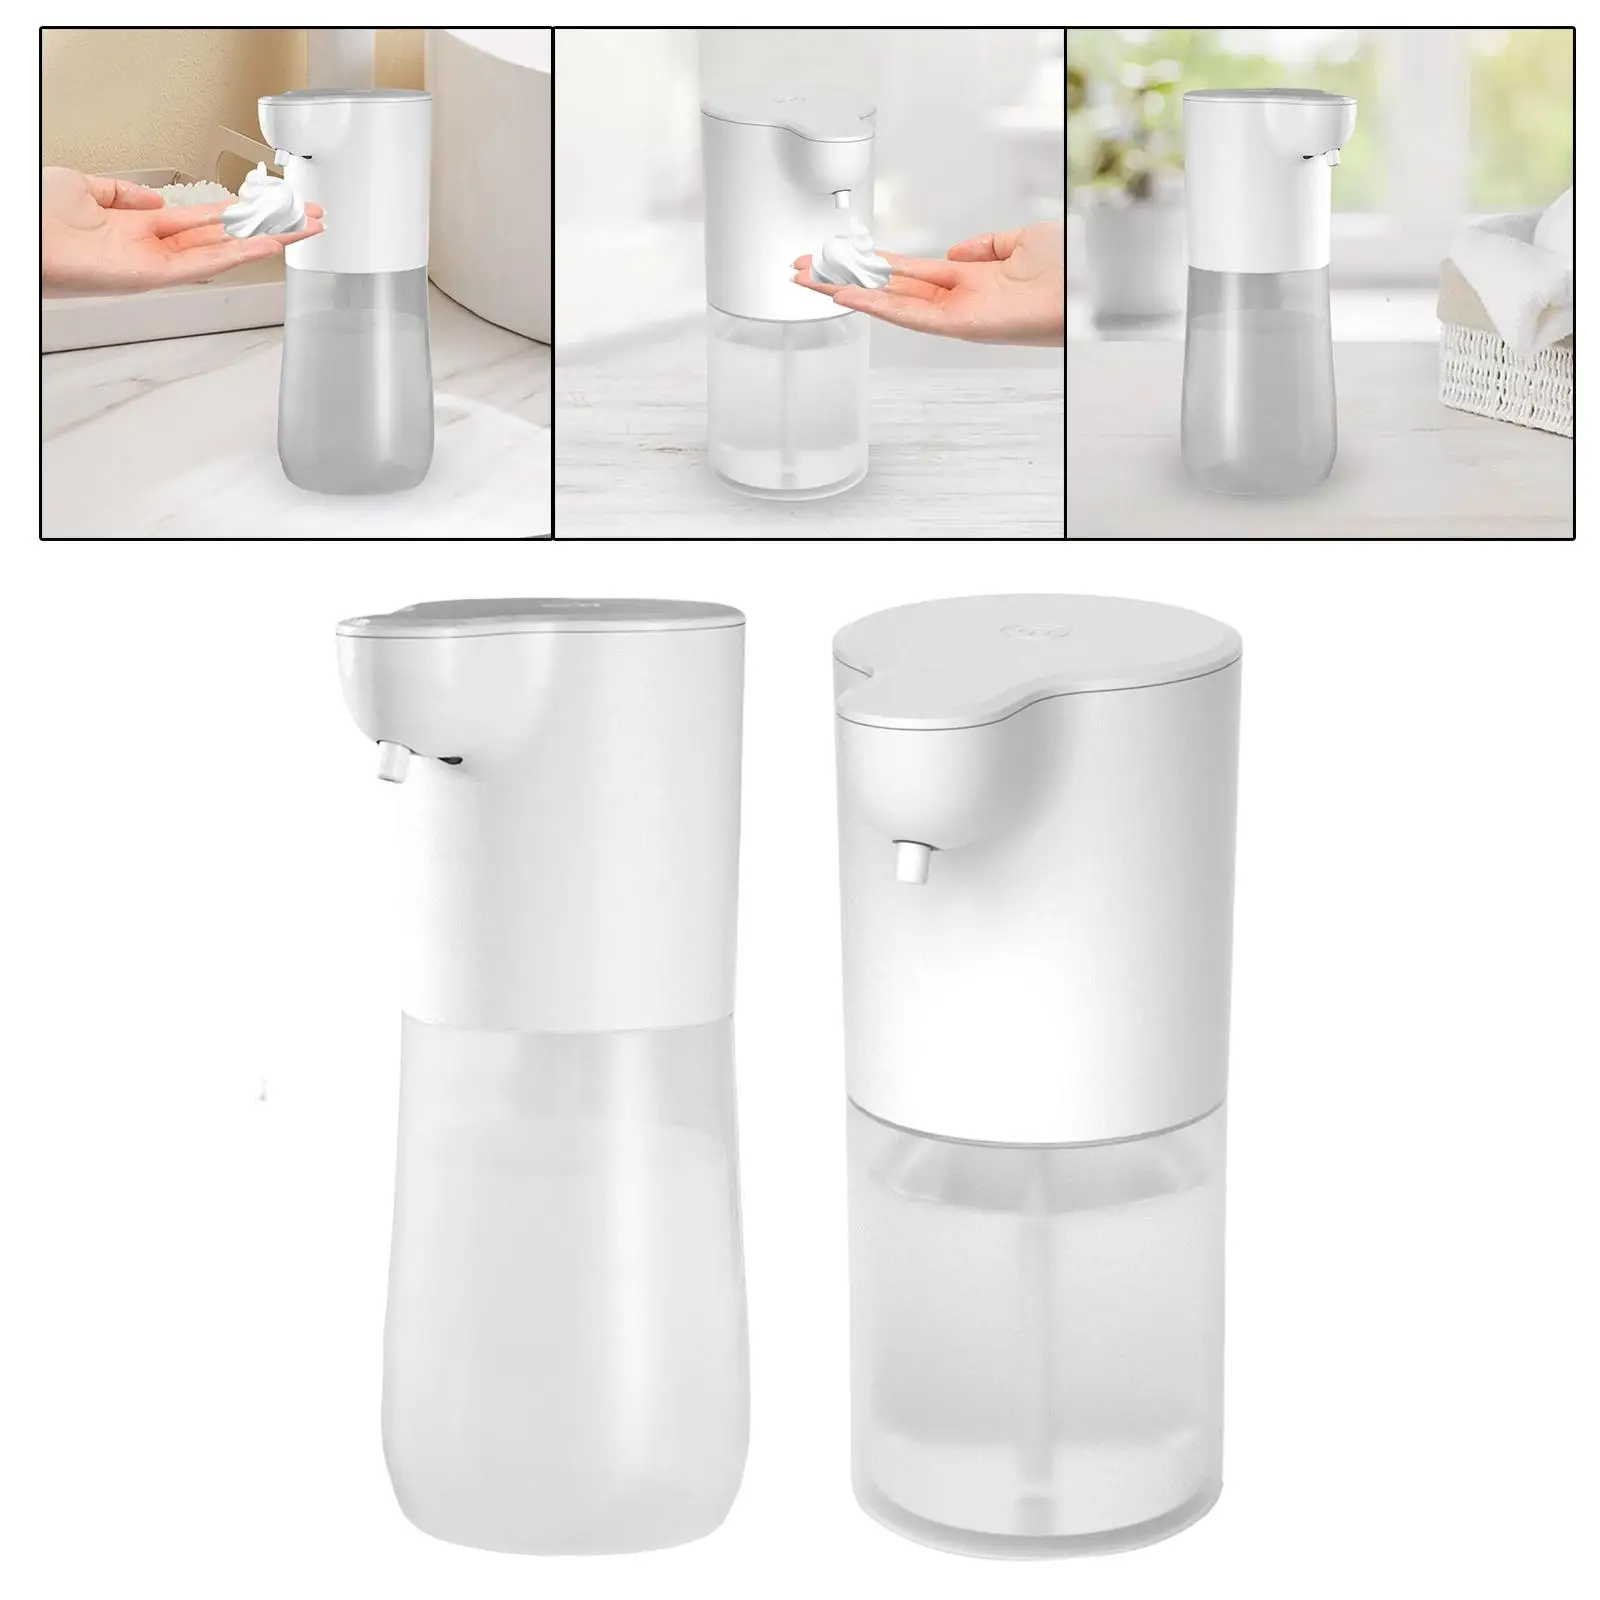 Automatic Liquid Soap Dispenser Induction Washing Hand Dispensers for Bathroom